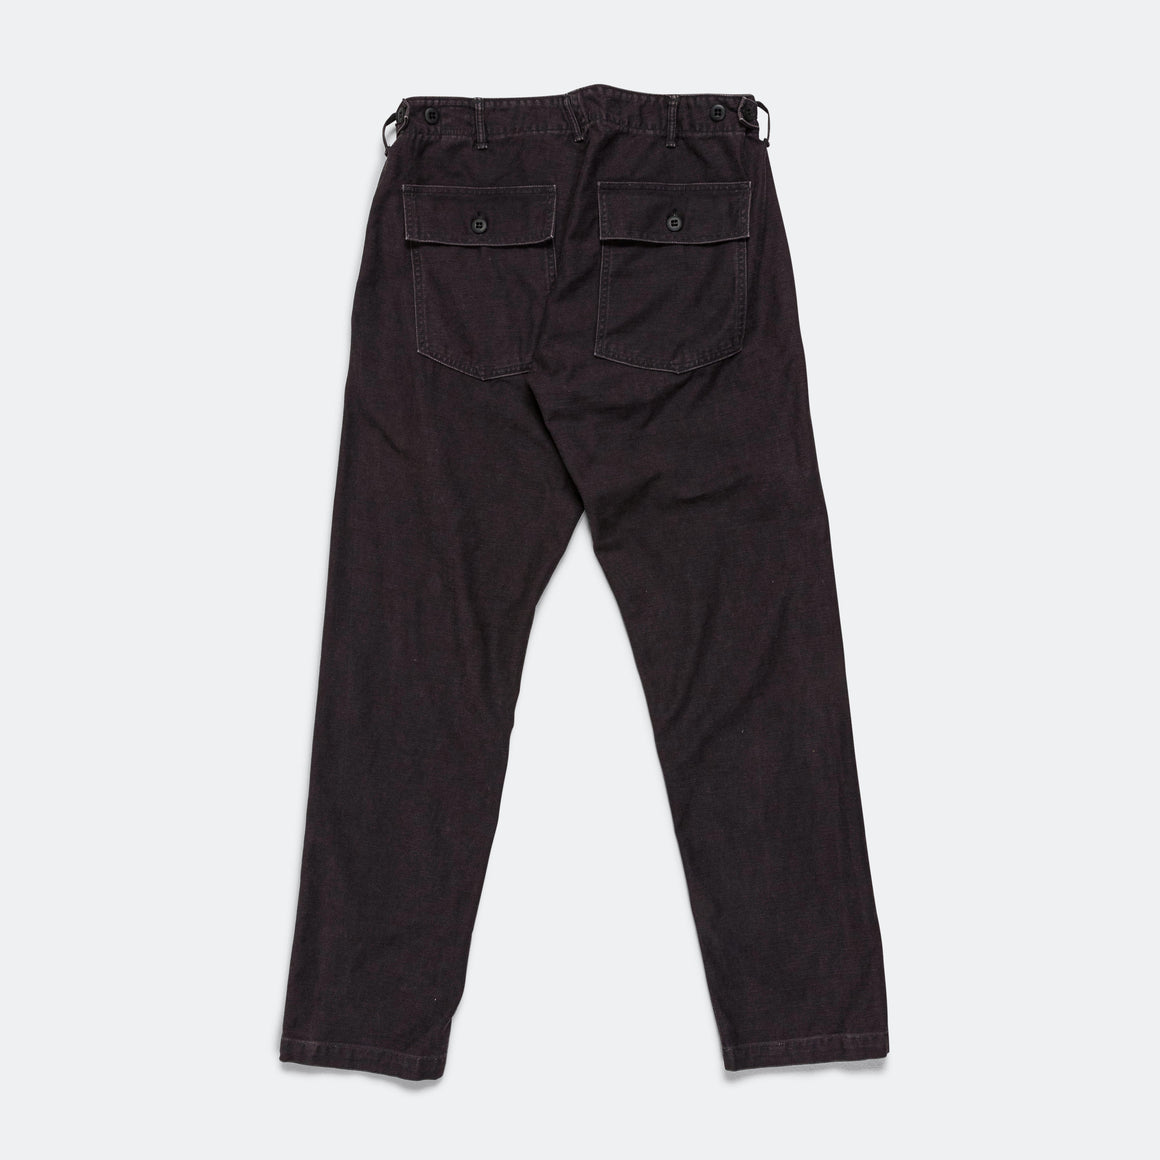 orSlow - Slim Fit Fatigue Pants - Black - UP THERE